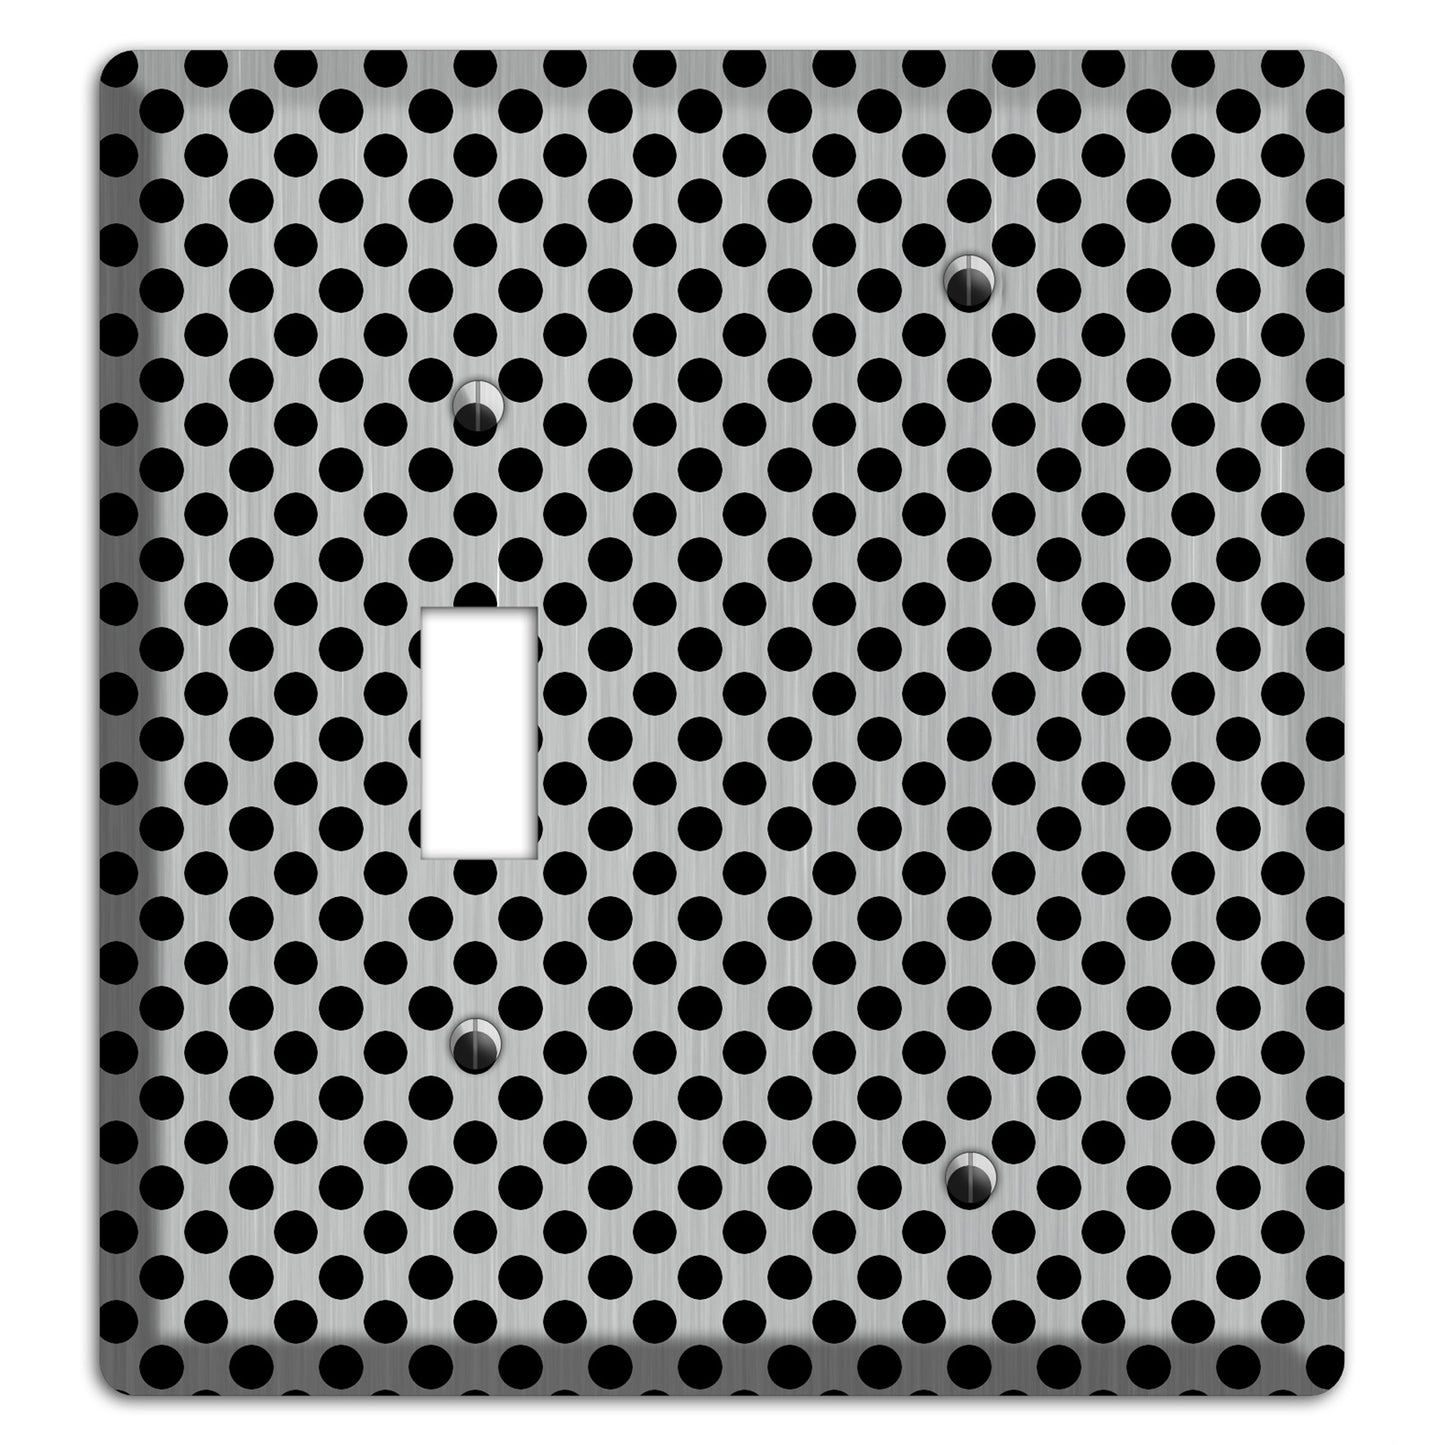 Packed Small Polka Dots Stainless Toggle / Blank Wallplate